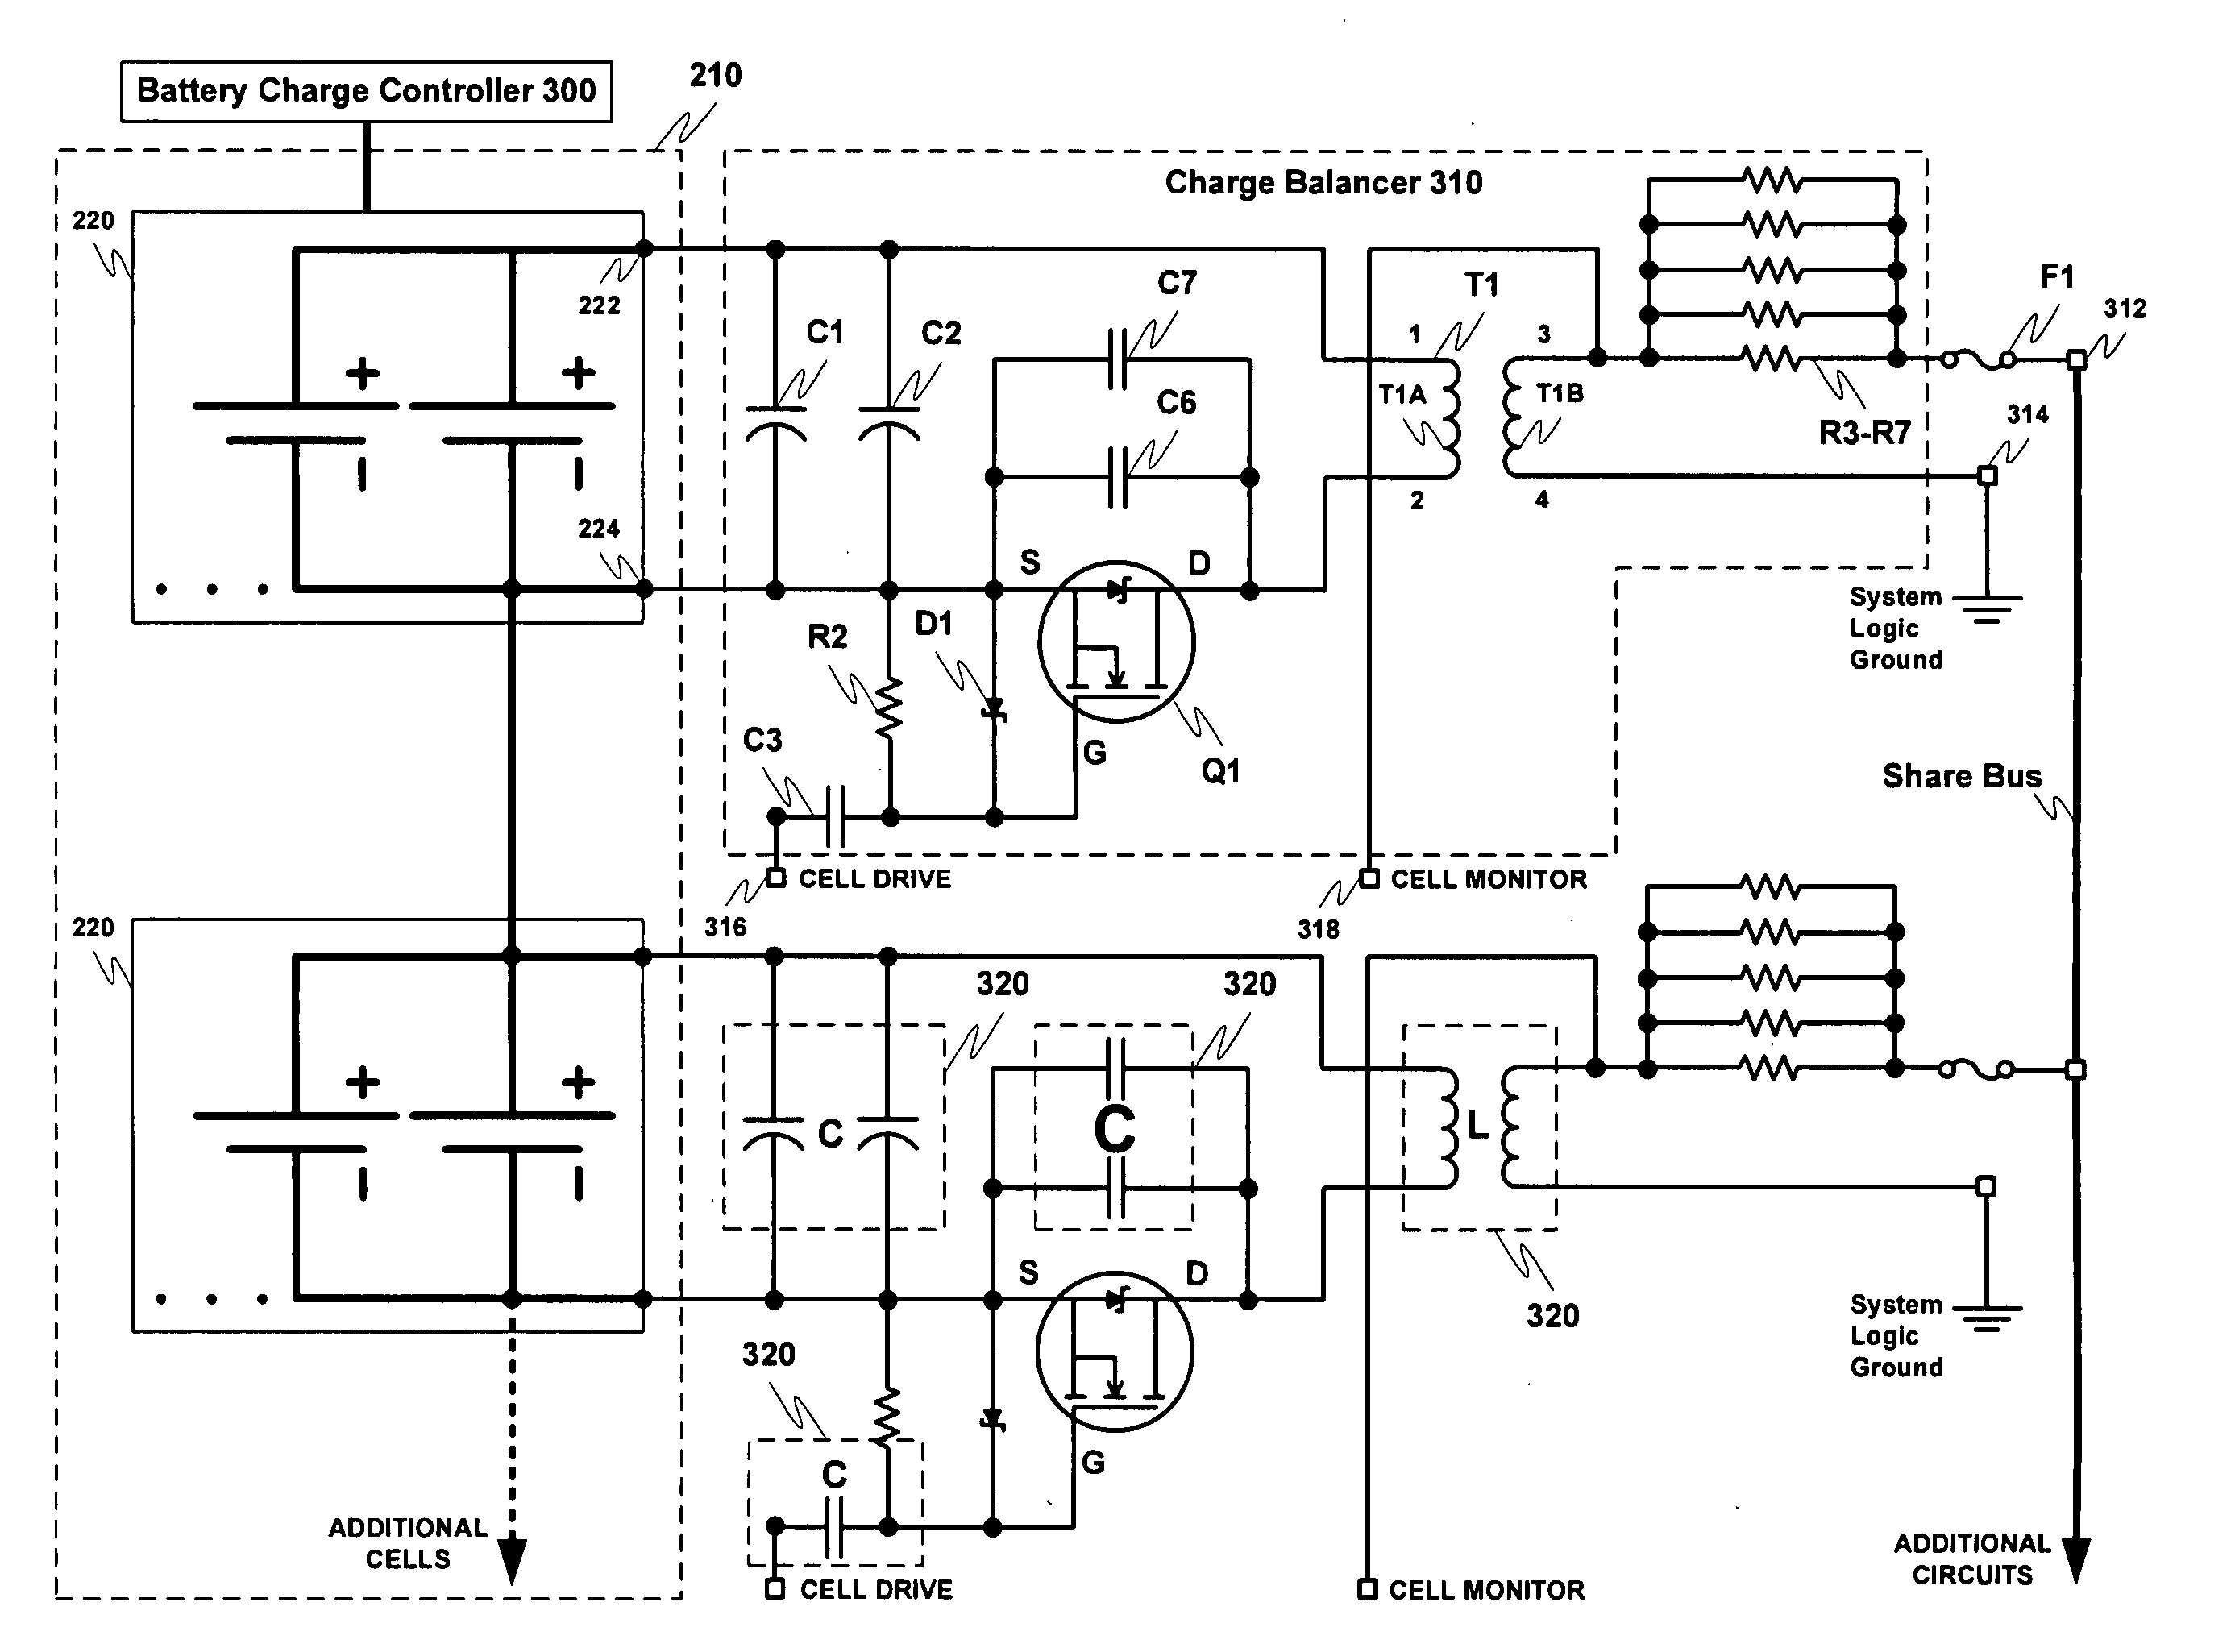 Battery balancing including resonant frequency compensation